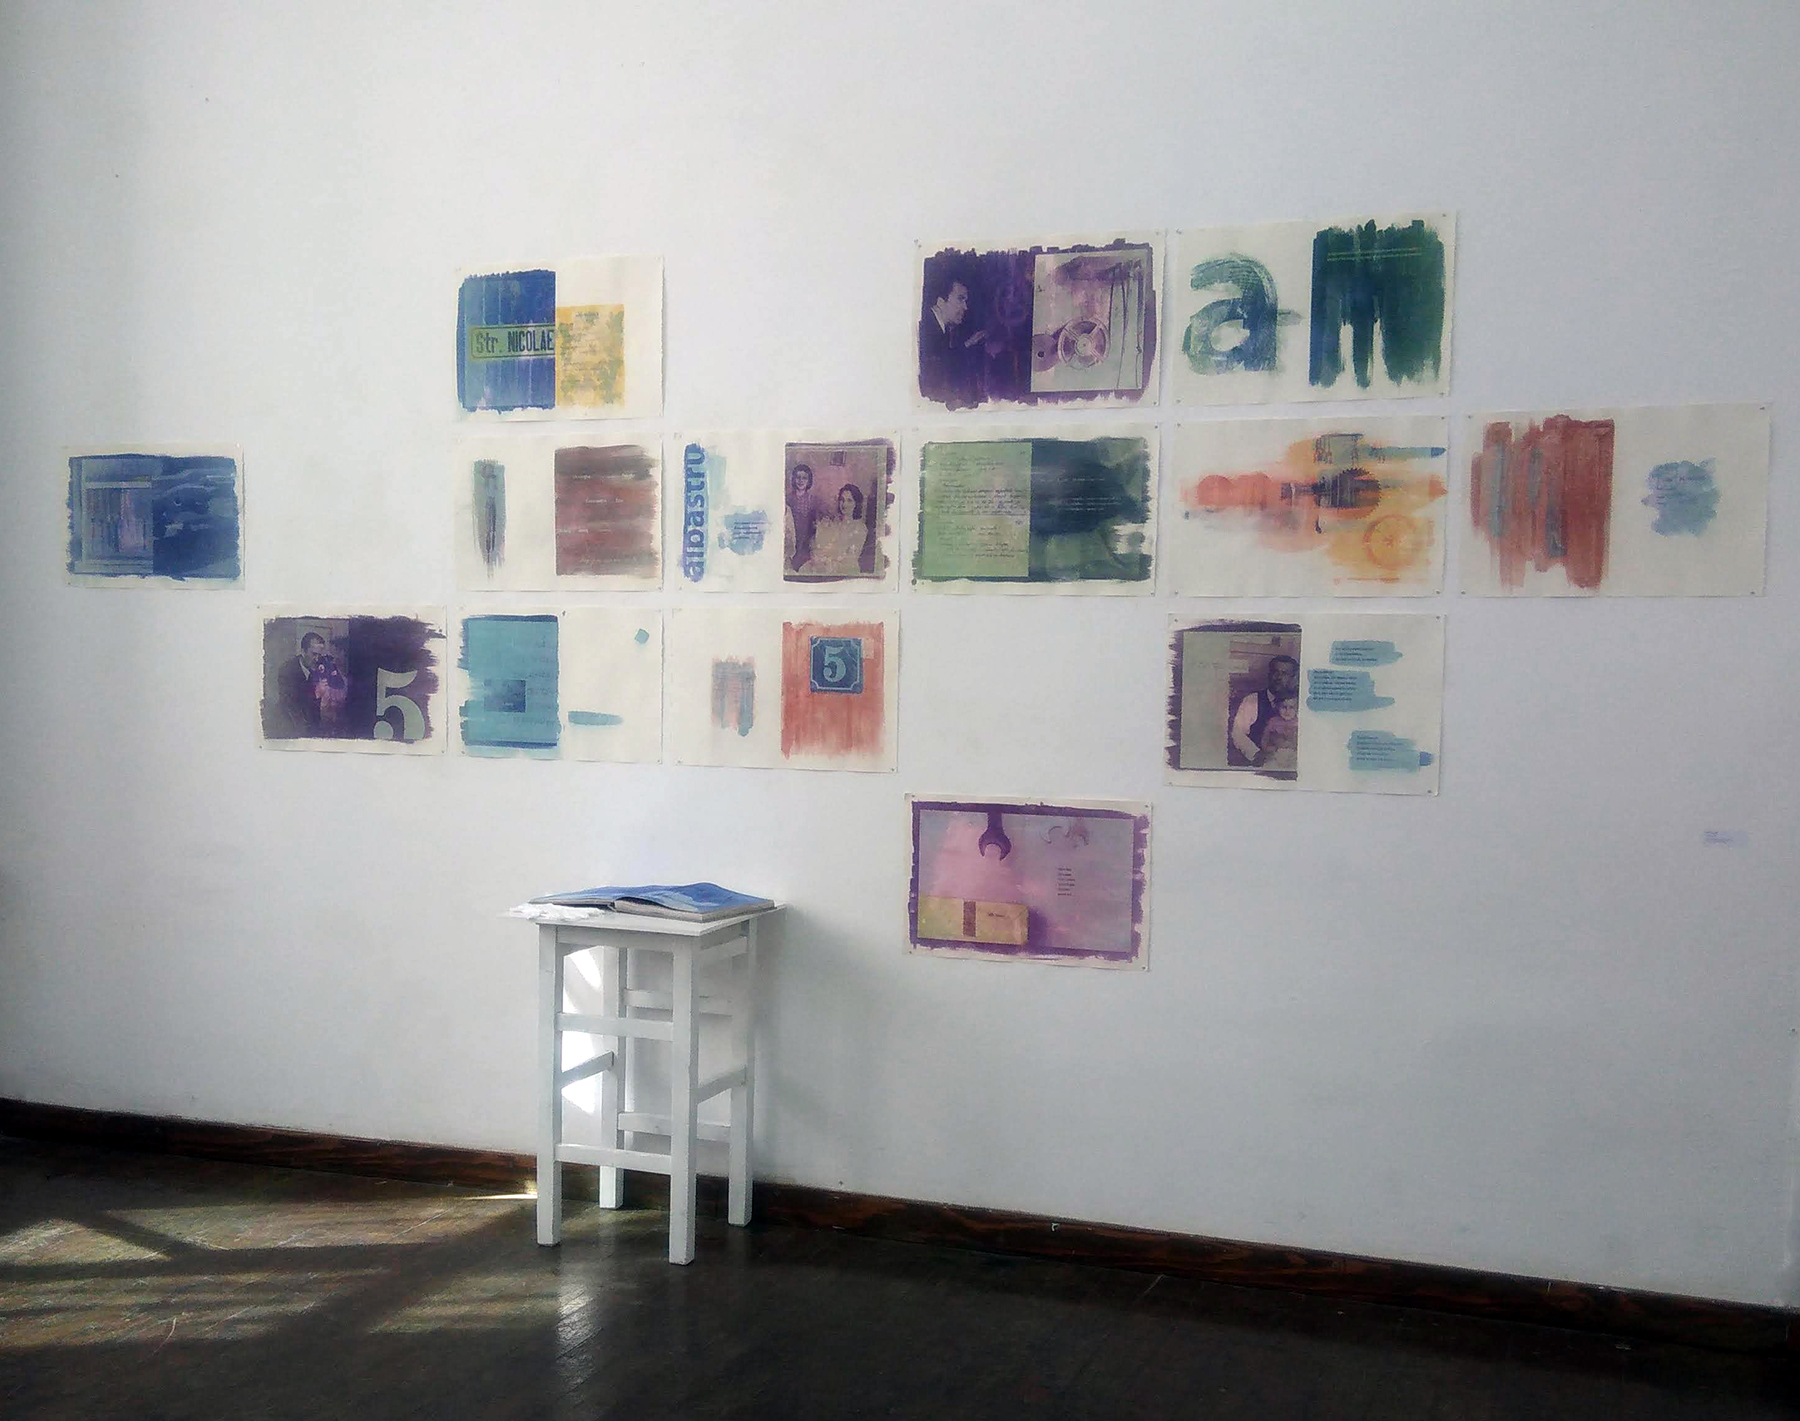 Urme de ieri- Master's degree project exhibition <br> manually printed book spreads, made using photosensitive paint